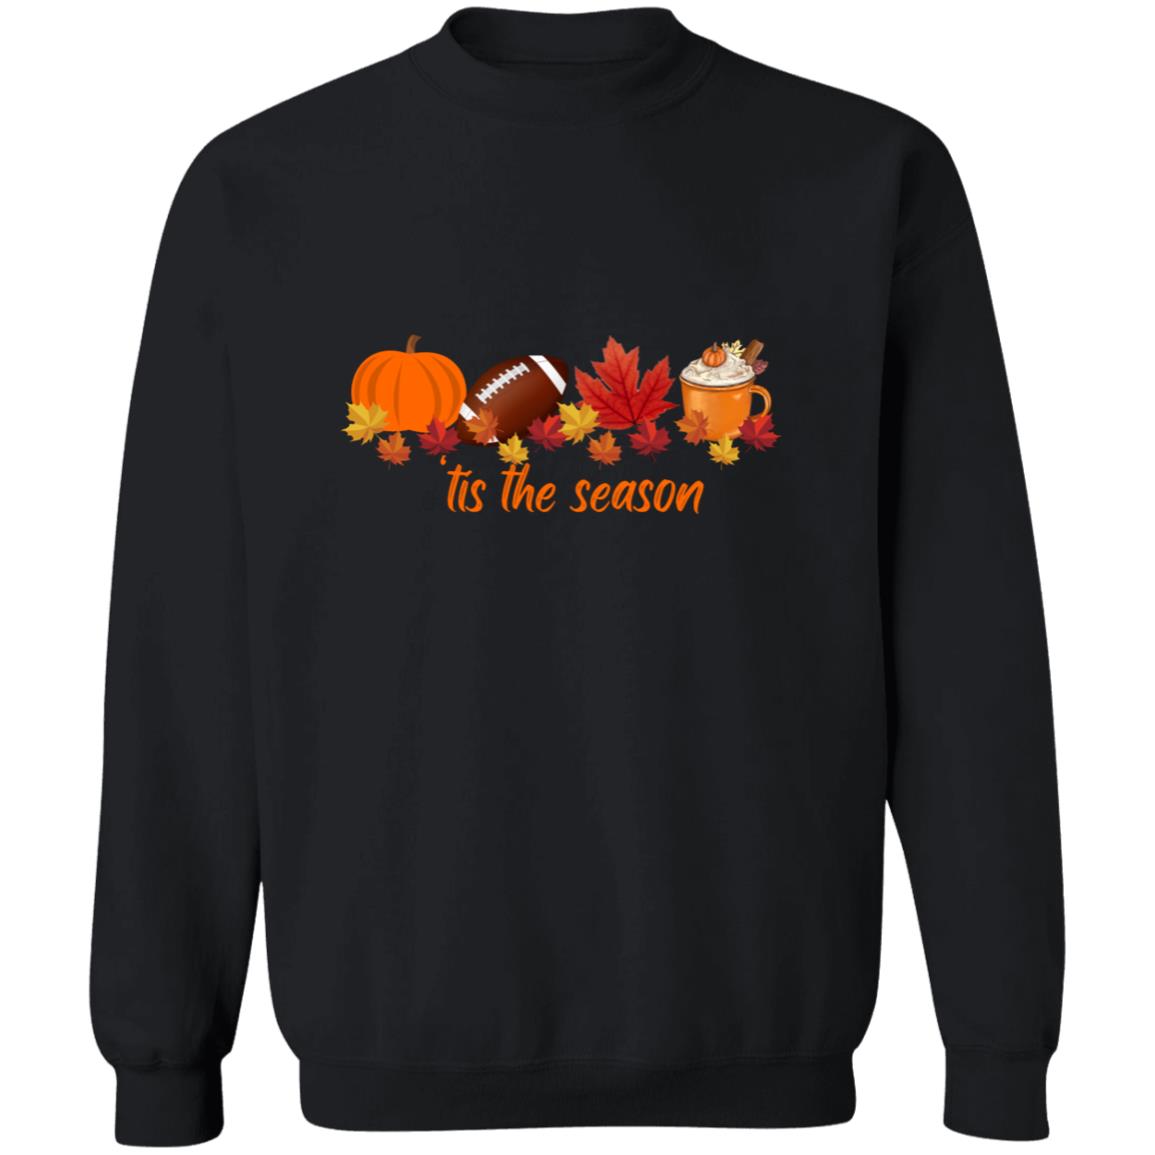 Get trendy with "Tis the Season" Crewneck Pullover Sweatshirt - Sweatshirts available at Good Gift Company. Grab yours for $21.95 today!